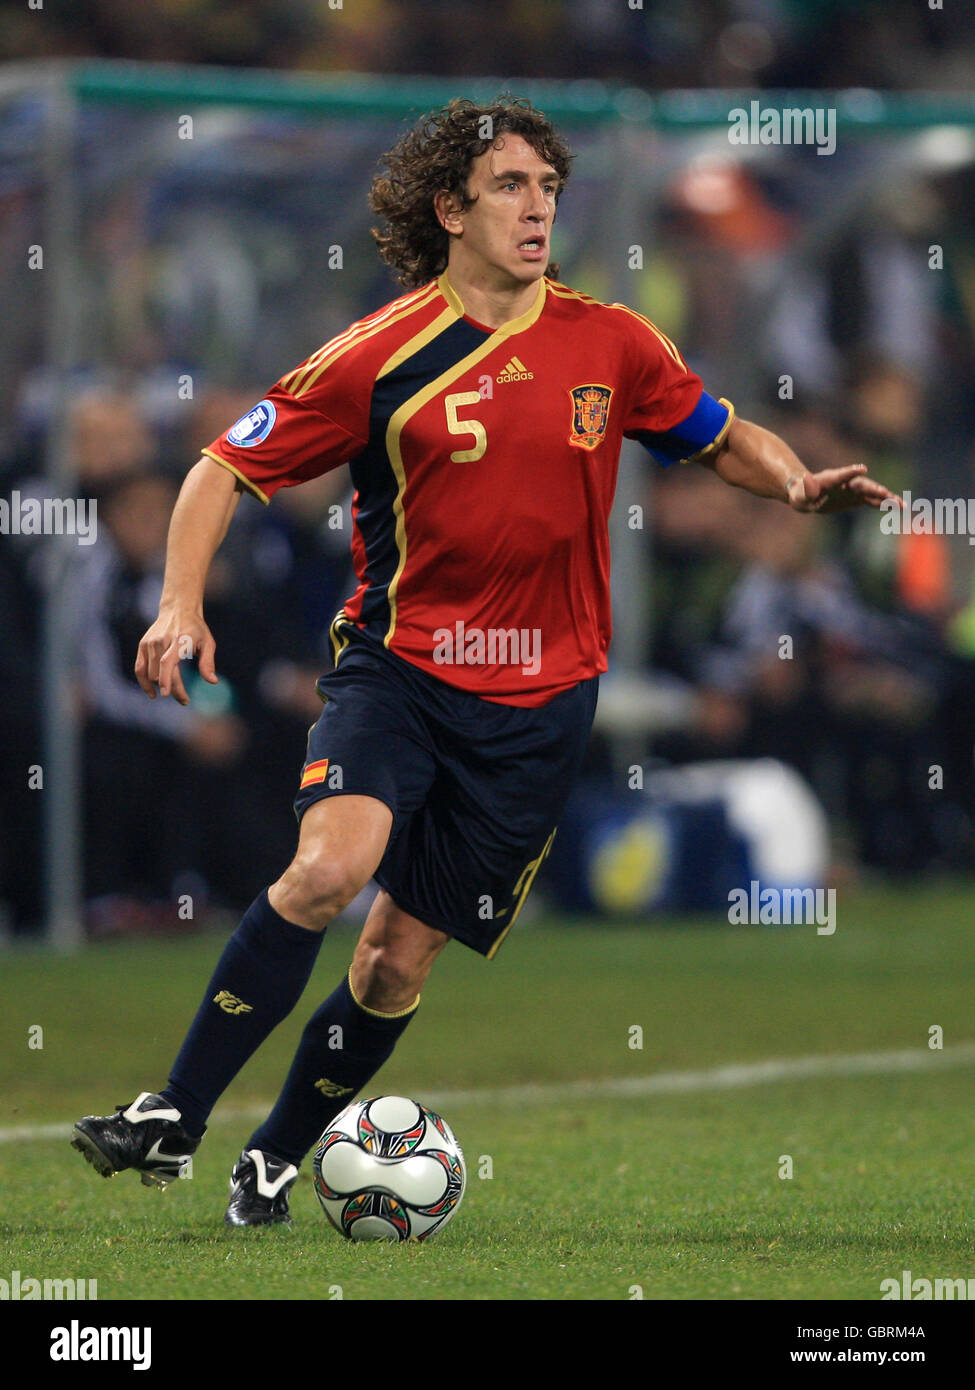 Soccer - Confederations Cup 2009 - Group A - Spain v South Africa - Free State Stadium. Carles Puyol, Spain Stock Photo